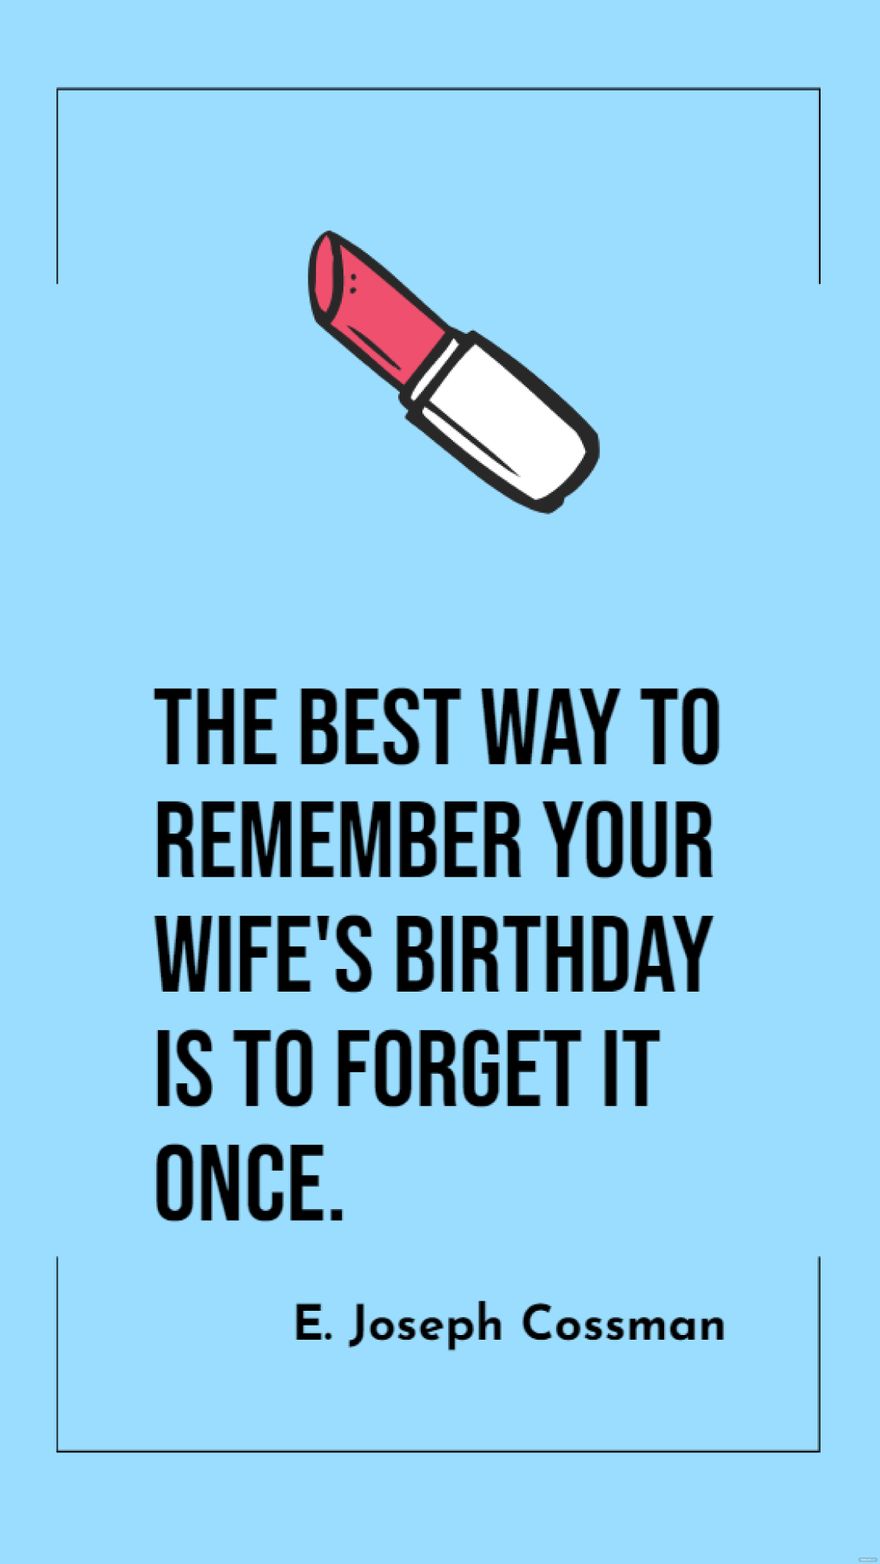 Free E. Joseph Cossman - The best way to remember your wife's birthday is to forget it once.